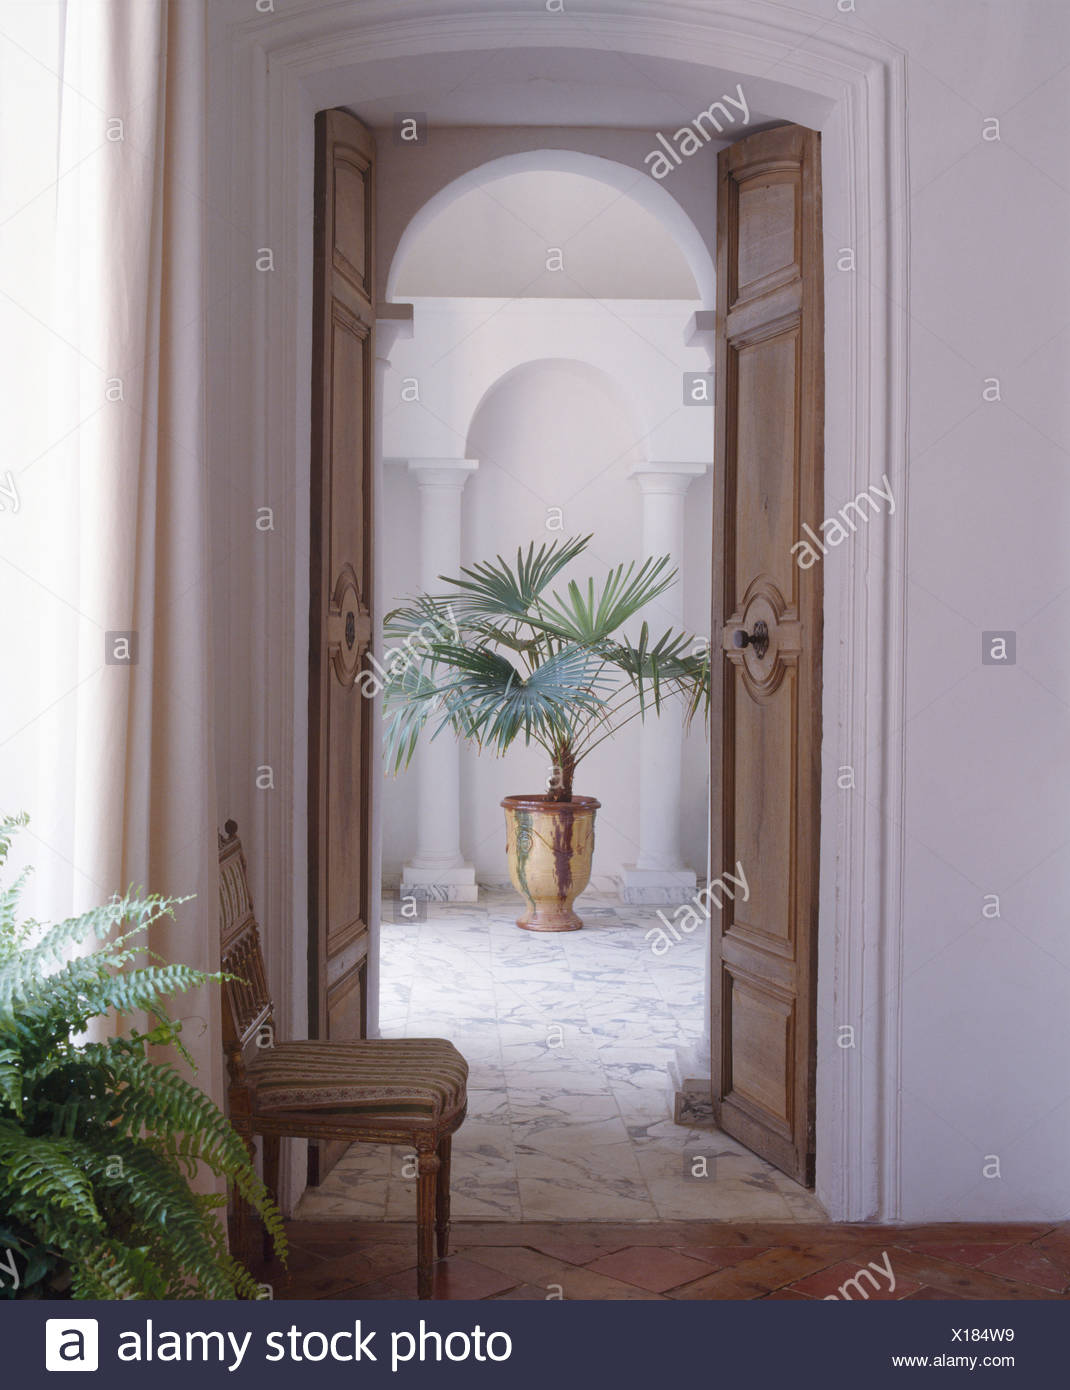 Open Double Wooden Doors In French Country Hall With